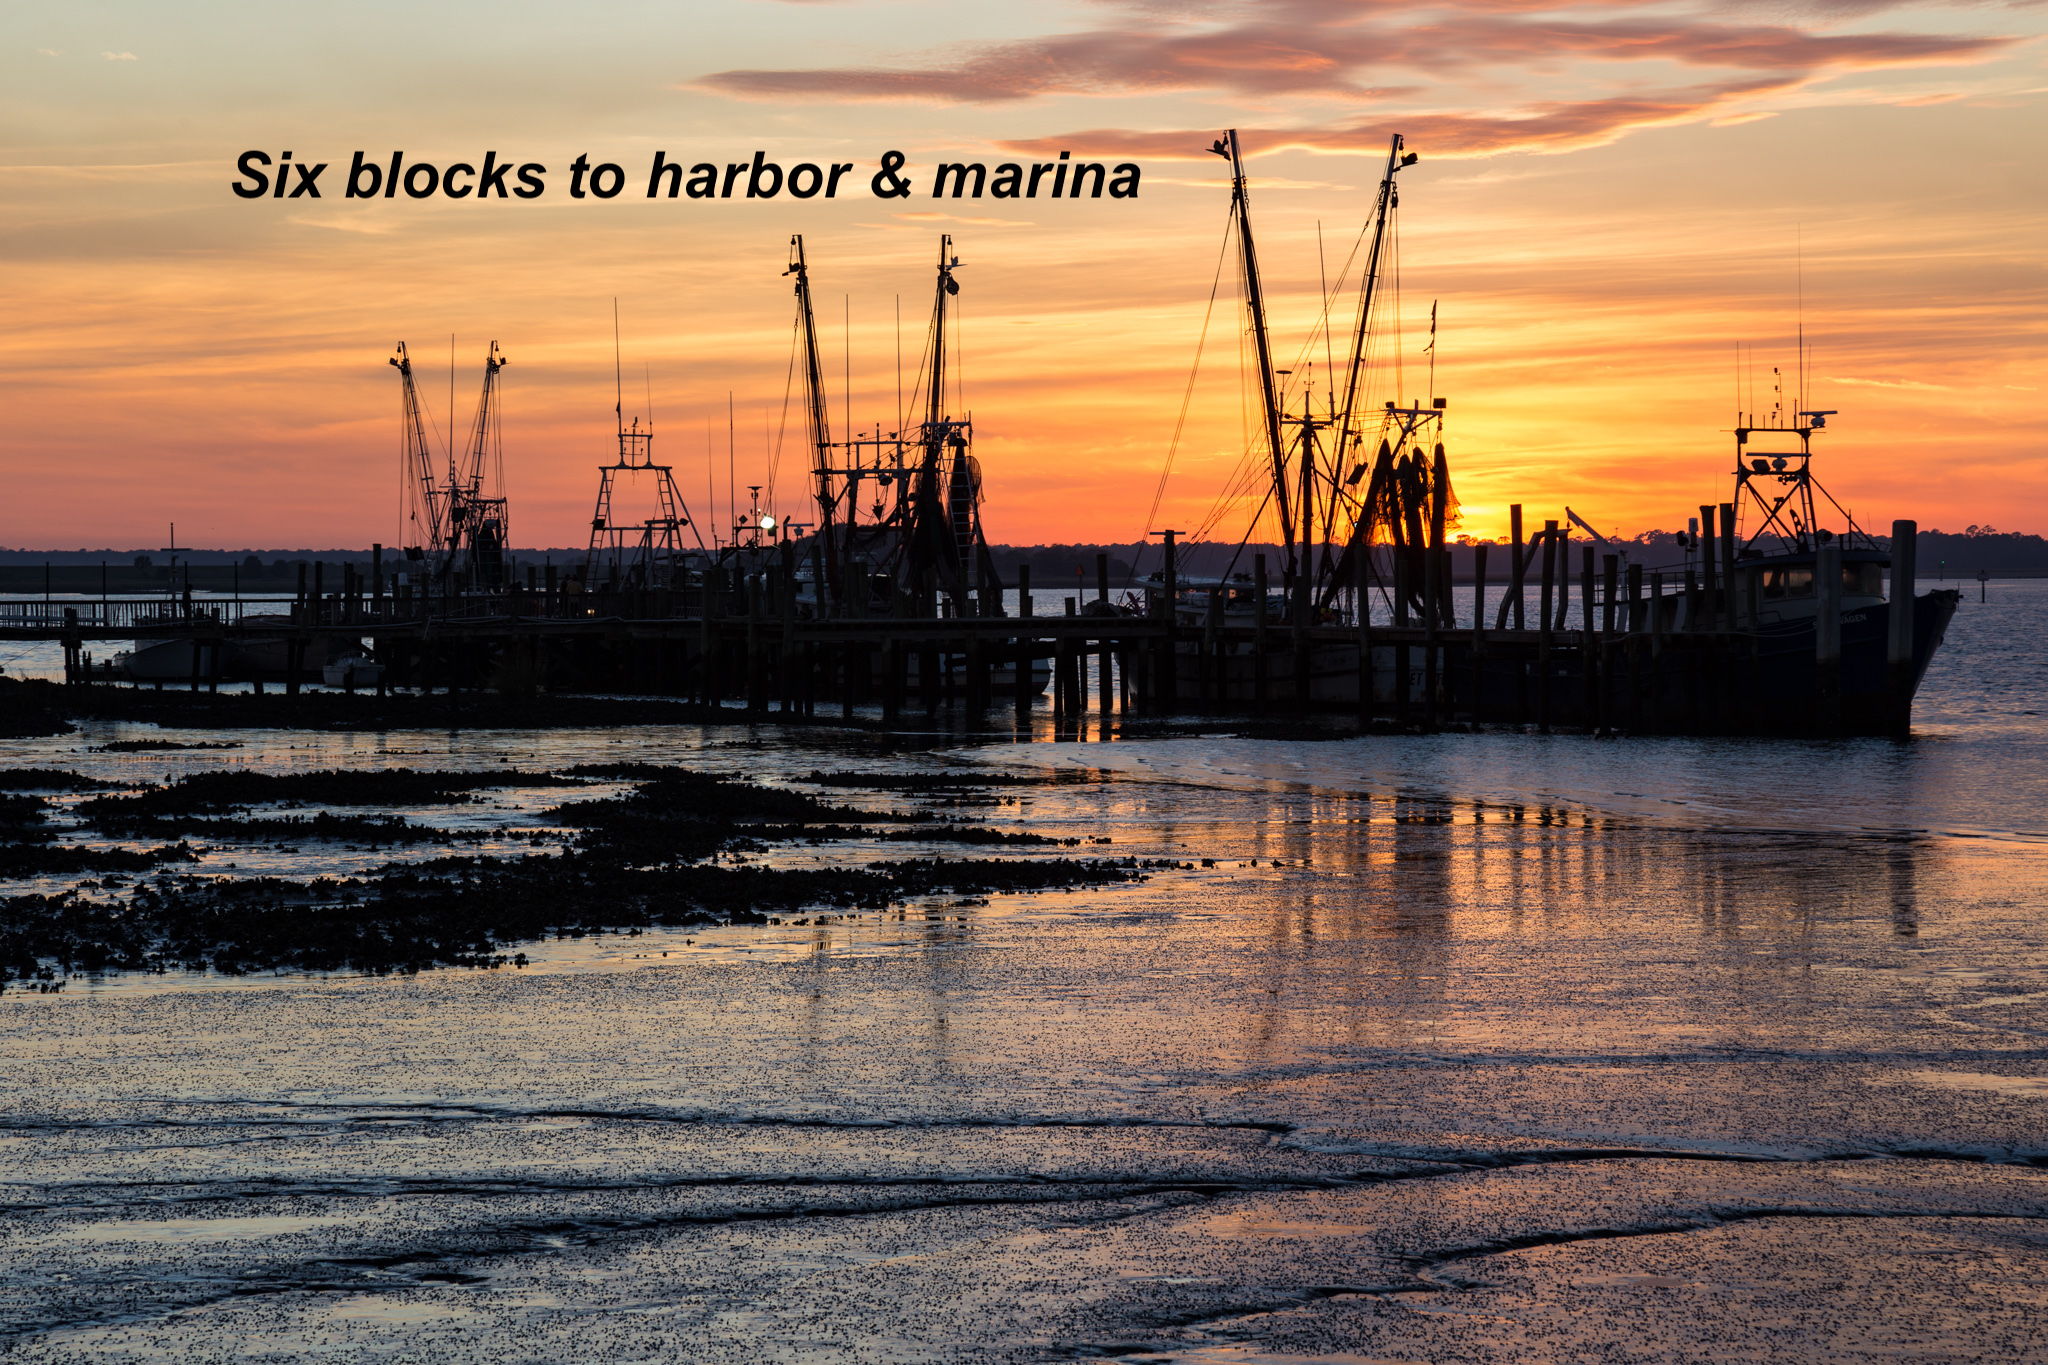 Watch the sunsets at the harbor